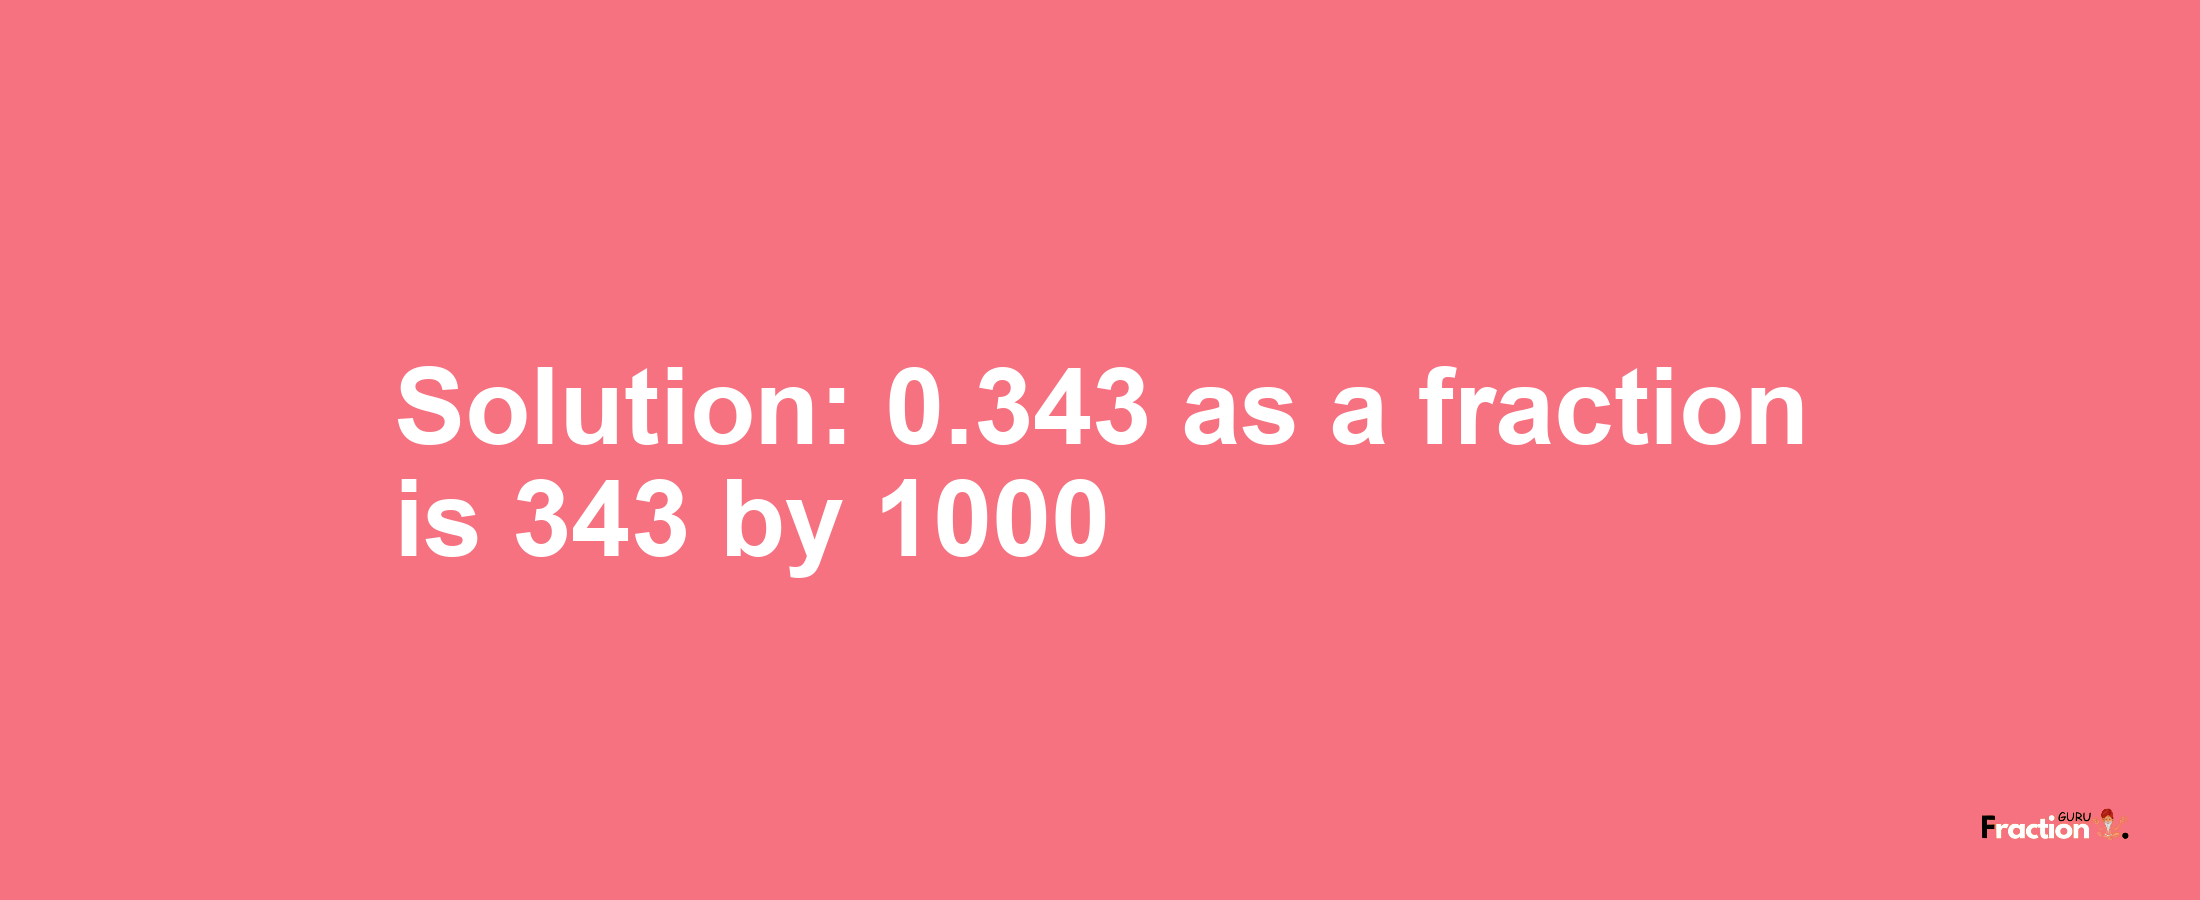 Solution:0.343 as a fraction is 343/1000